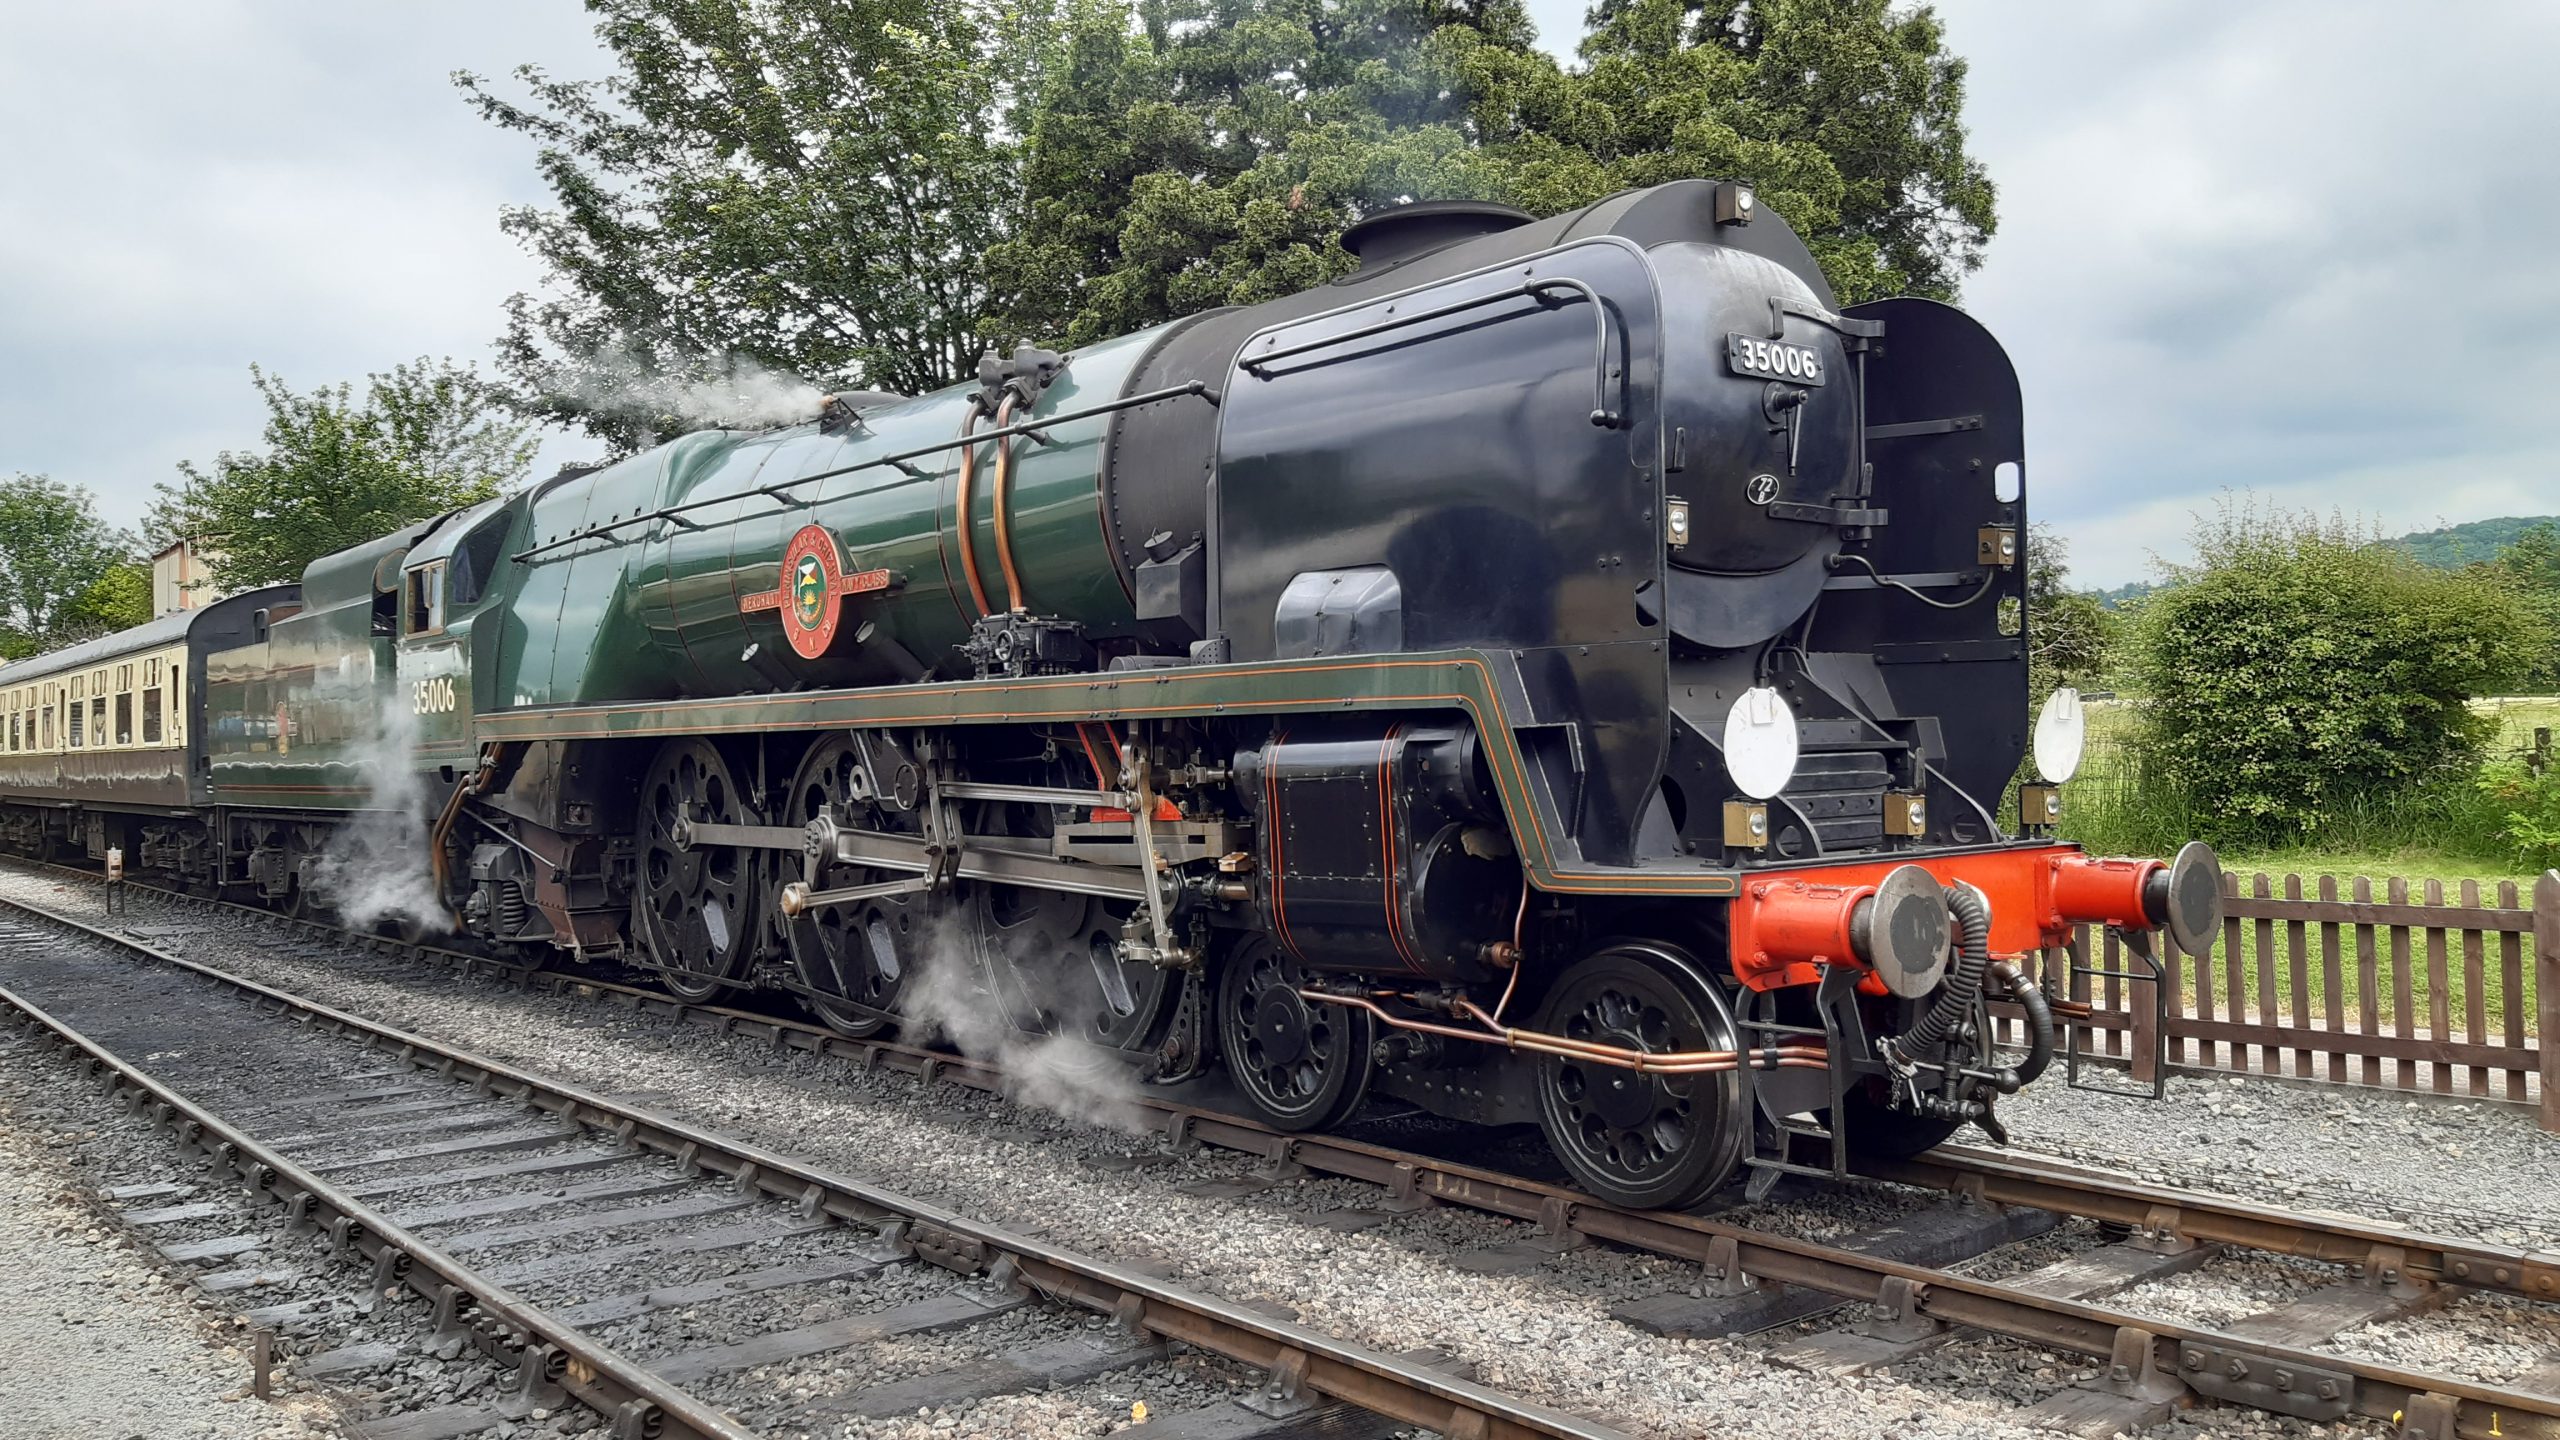 Merchant Navy 35006 'Peninsular and Oriental SN Co' awaiting departure from Toddington on the 14.35 to Cheltenham Racecourse, 17th June 2021